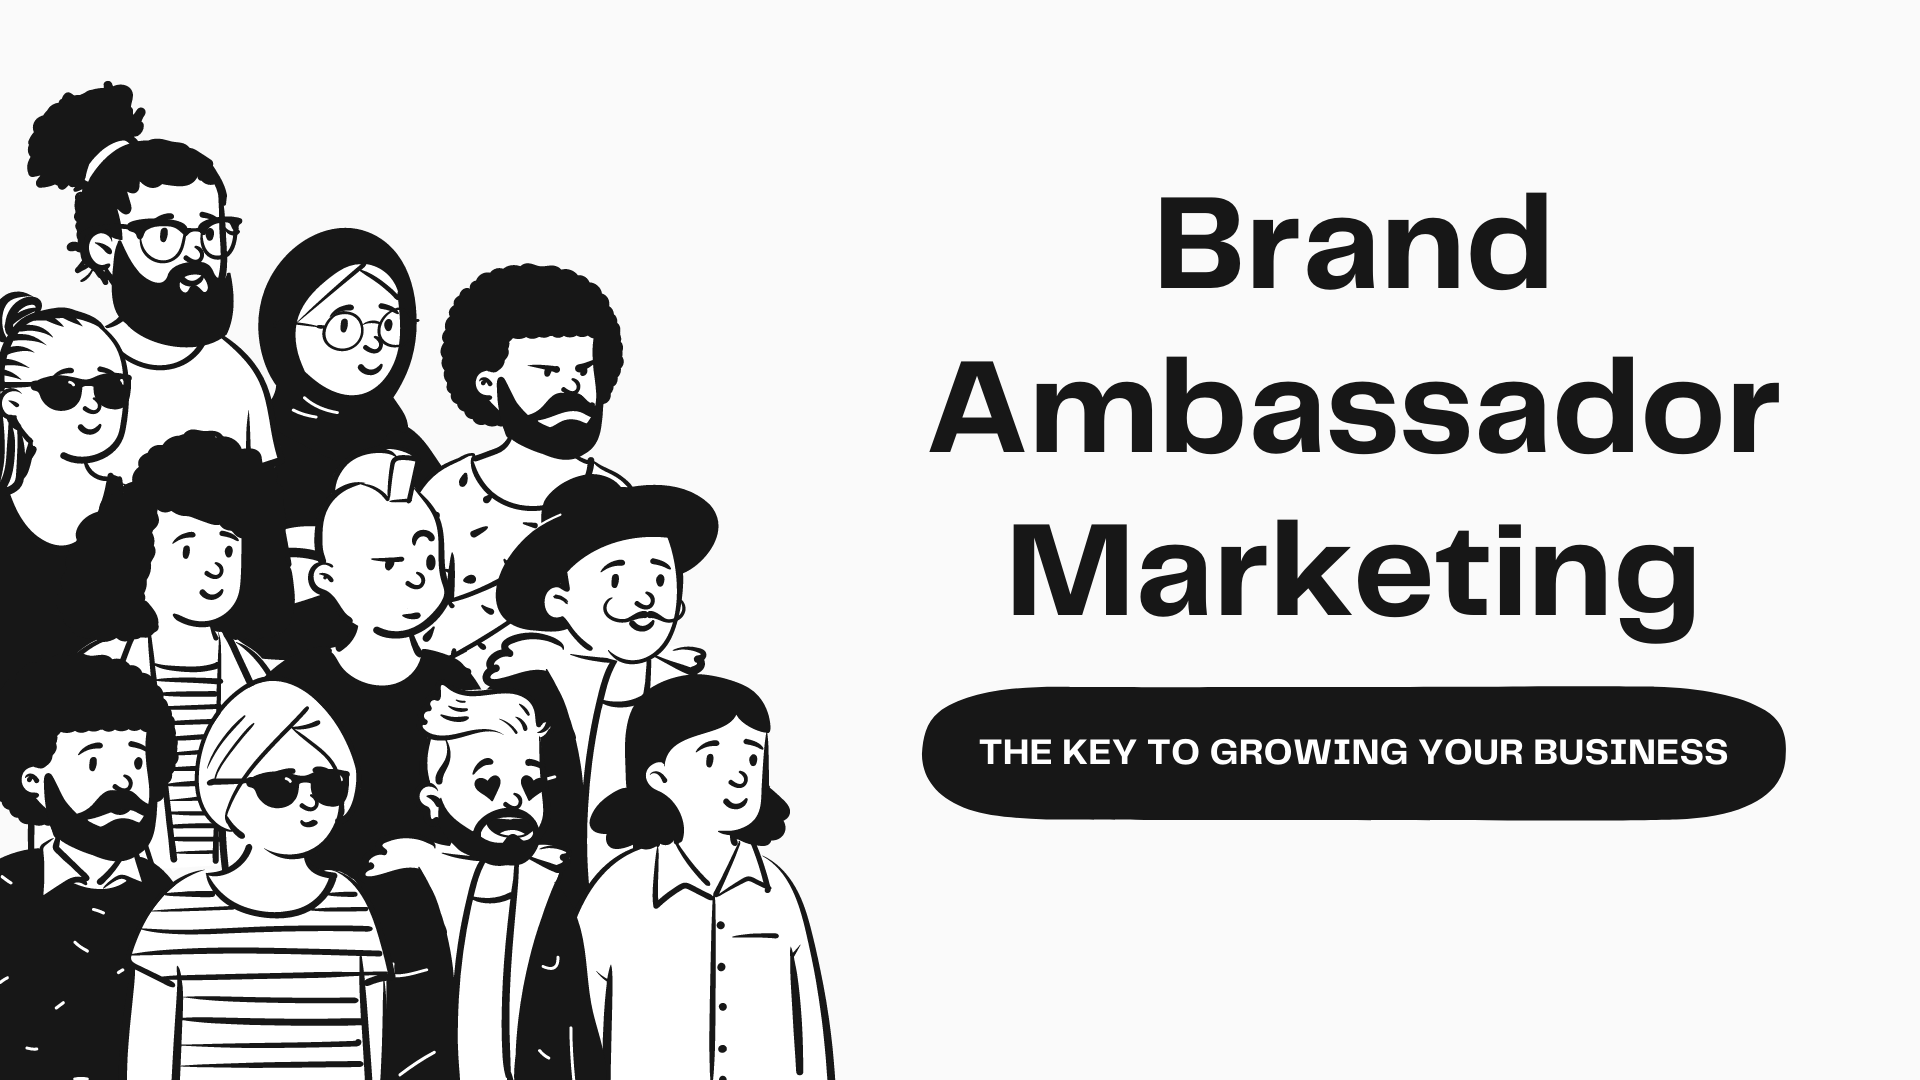 Brand Ambassador Marketing: The Key To Growing Your Business